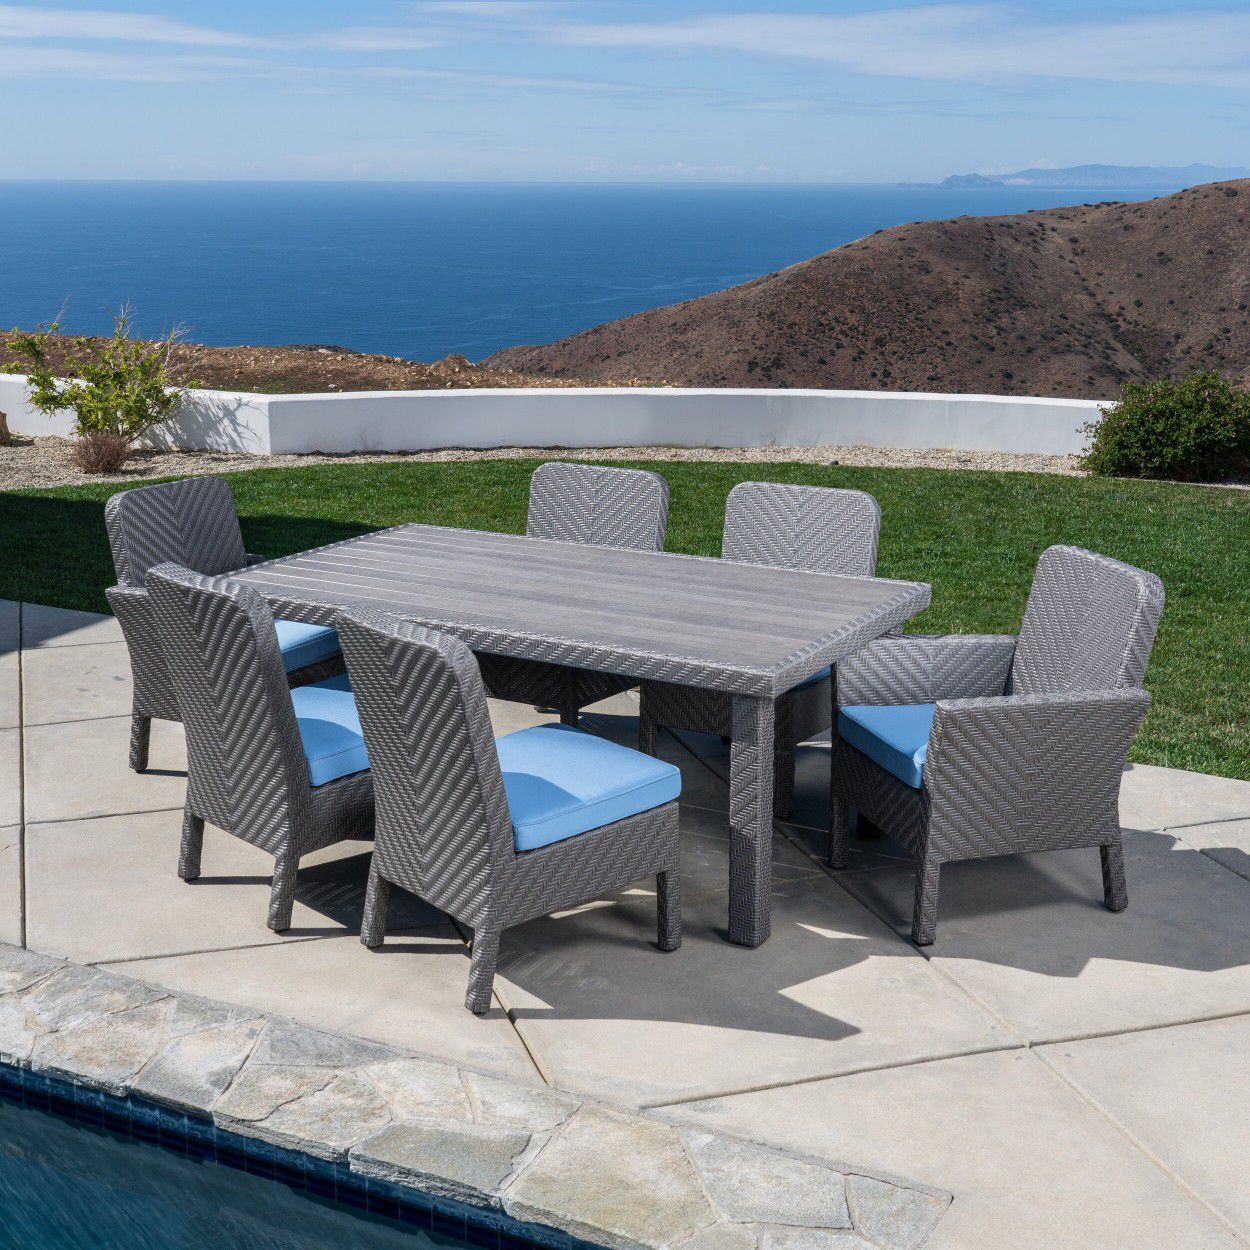 New 7pc outdoor patio furniture dining set sunbrella tax included